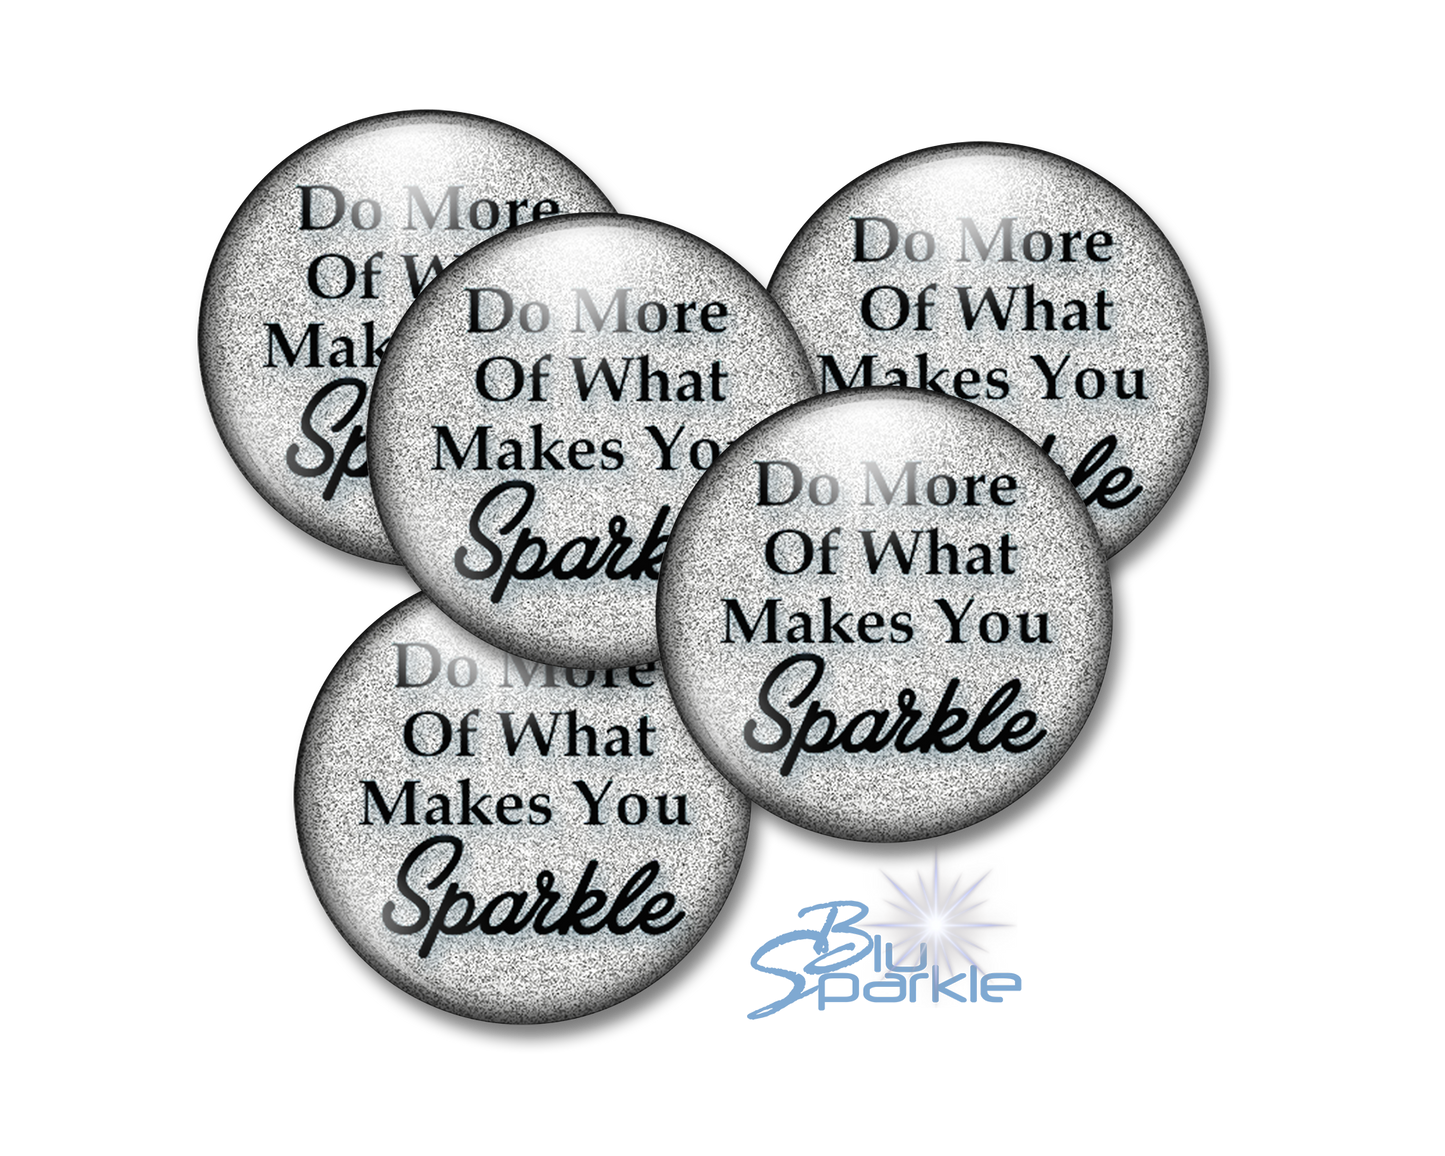 Do More Of What Makes You Sparkle - Pinback Buttons